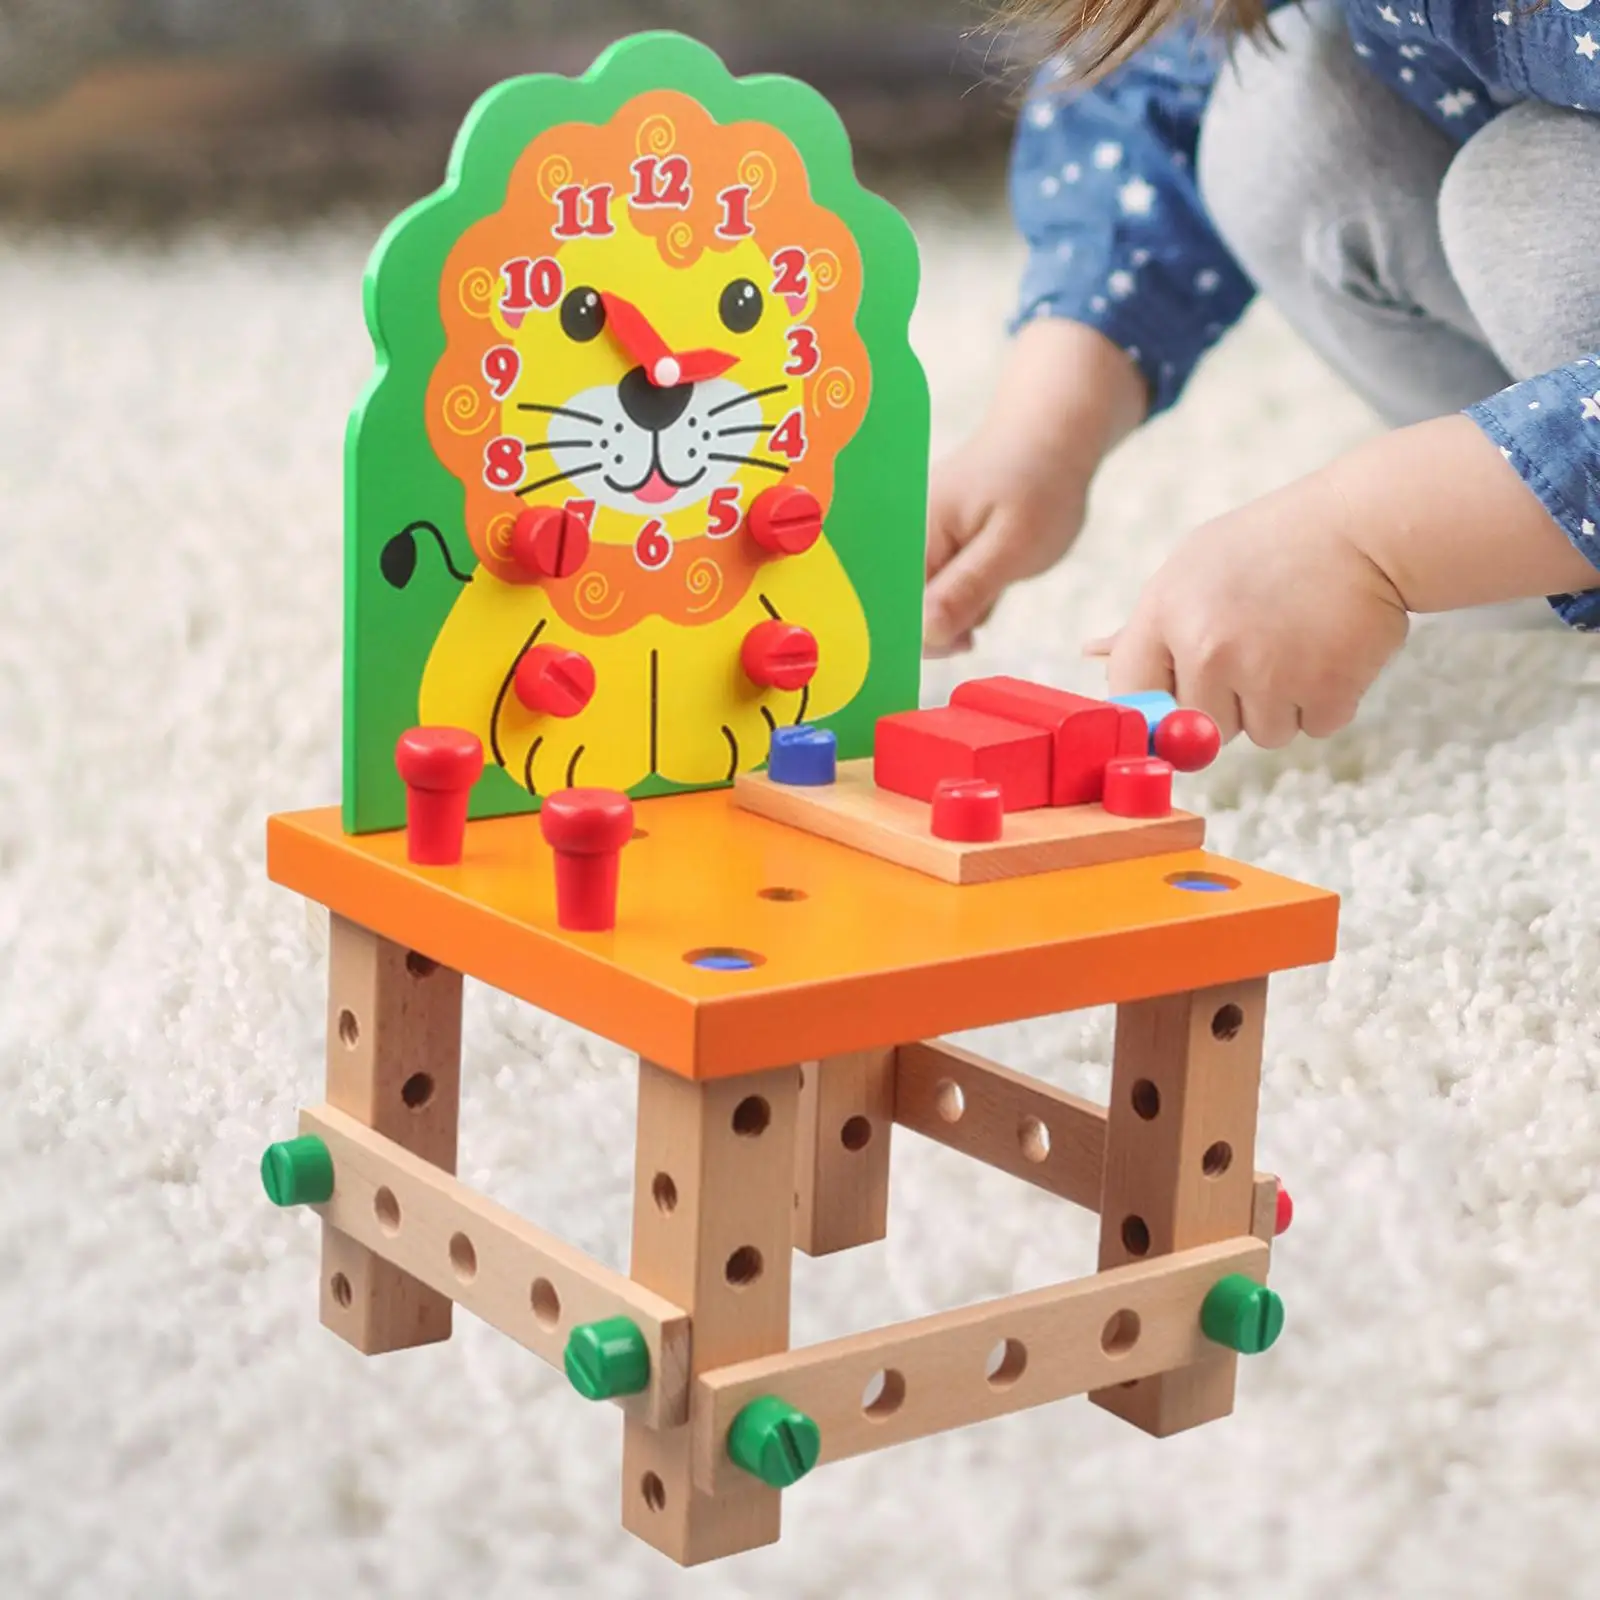 Kids Wooden Project Woodworking Kit Educational Building Toy for Gifts